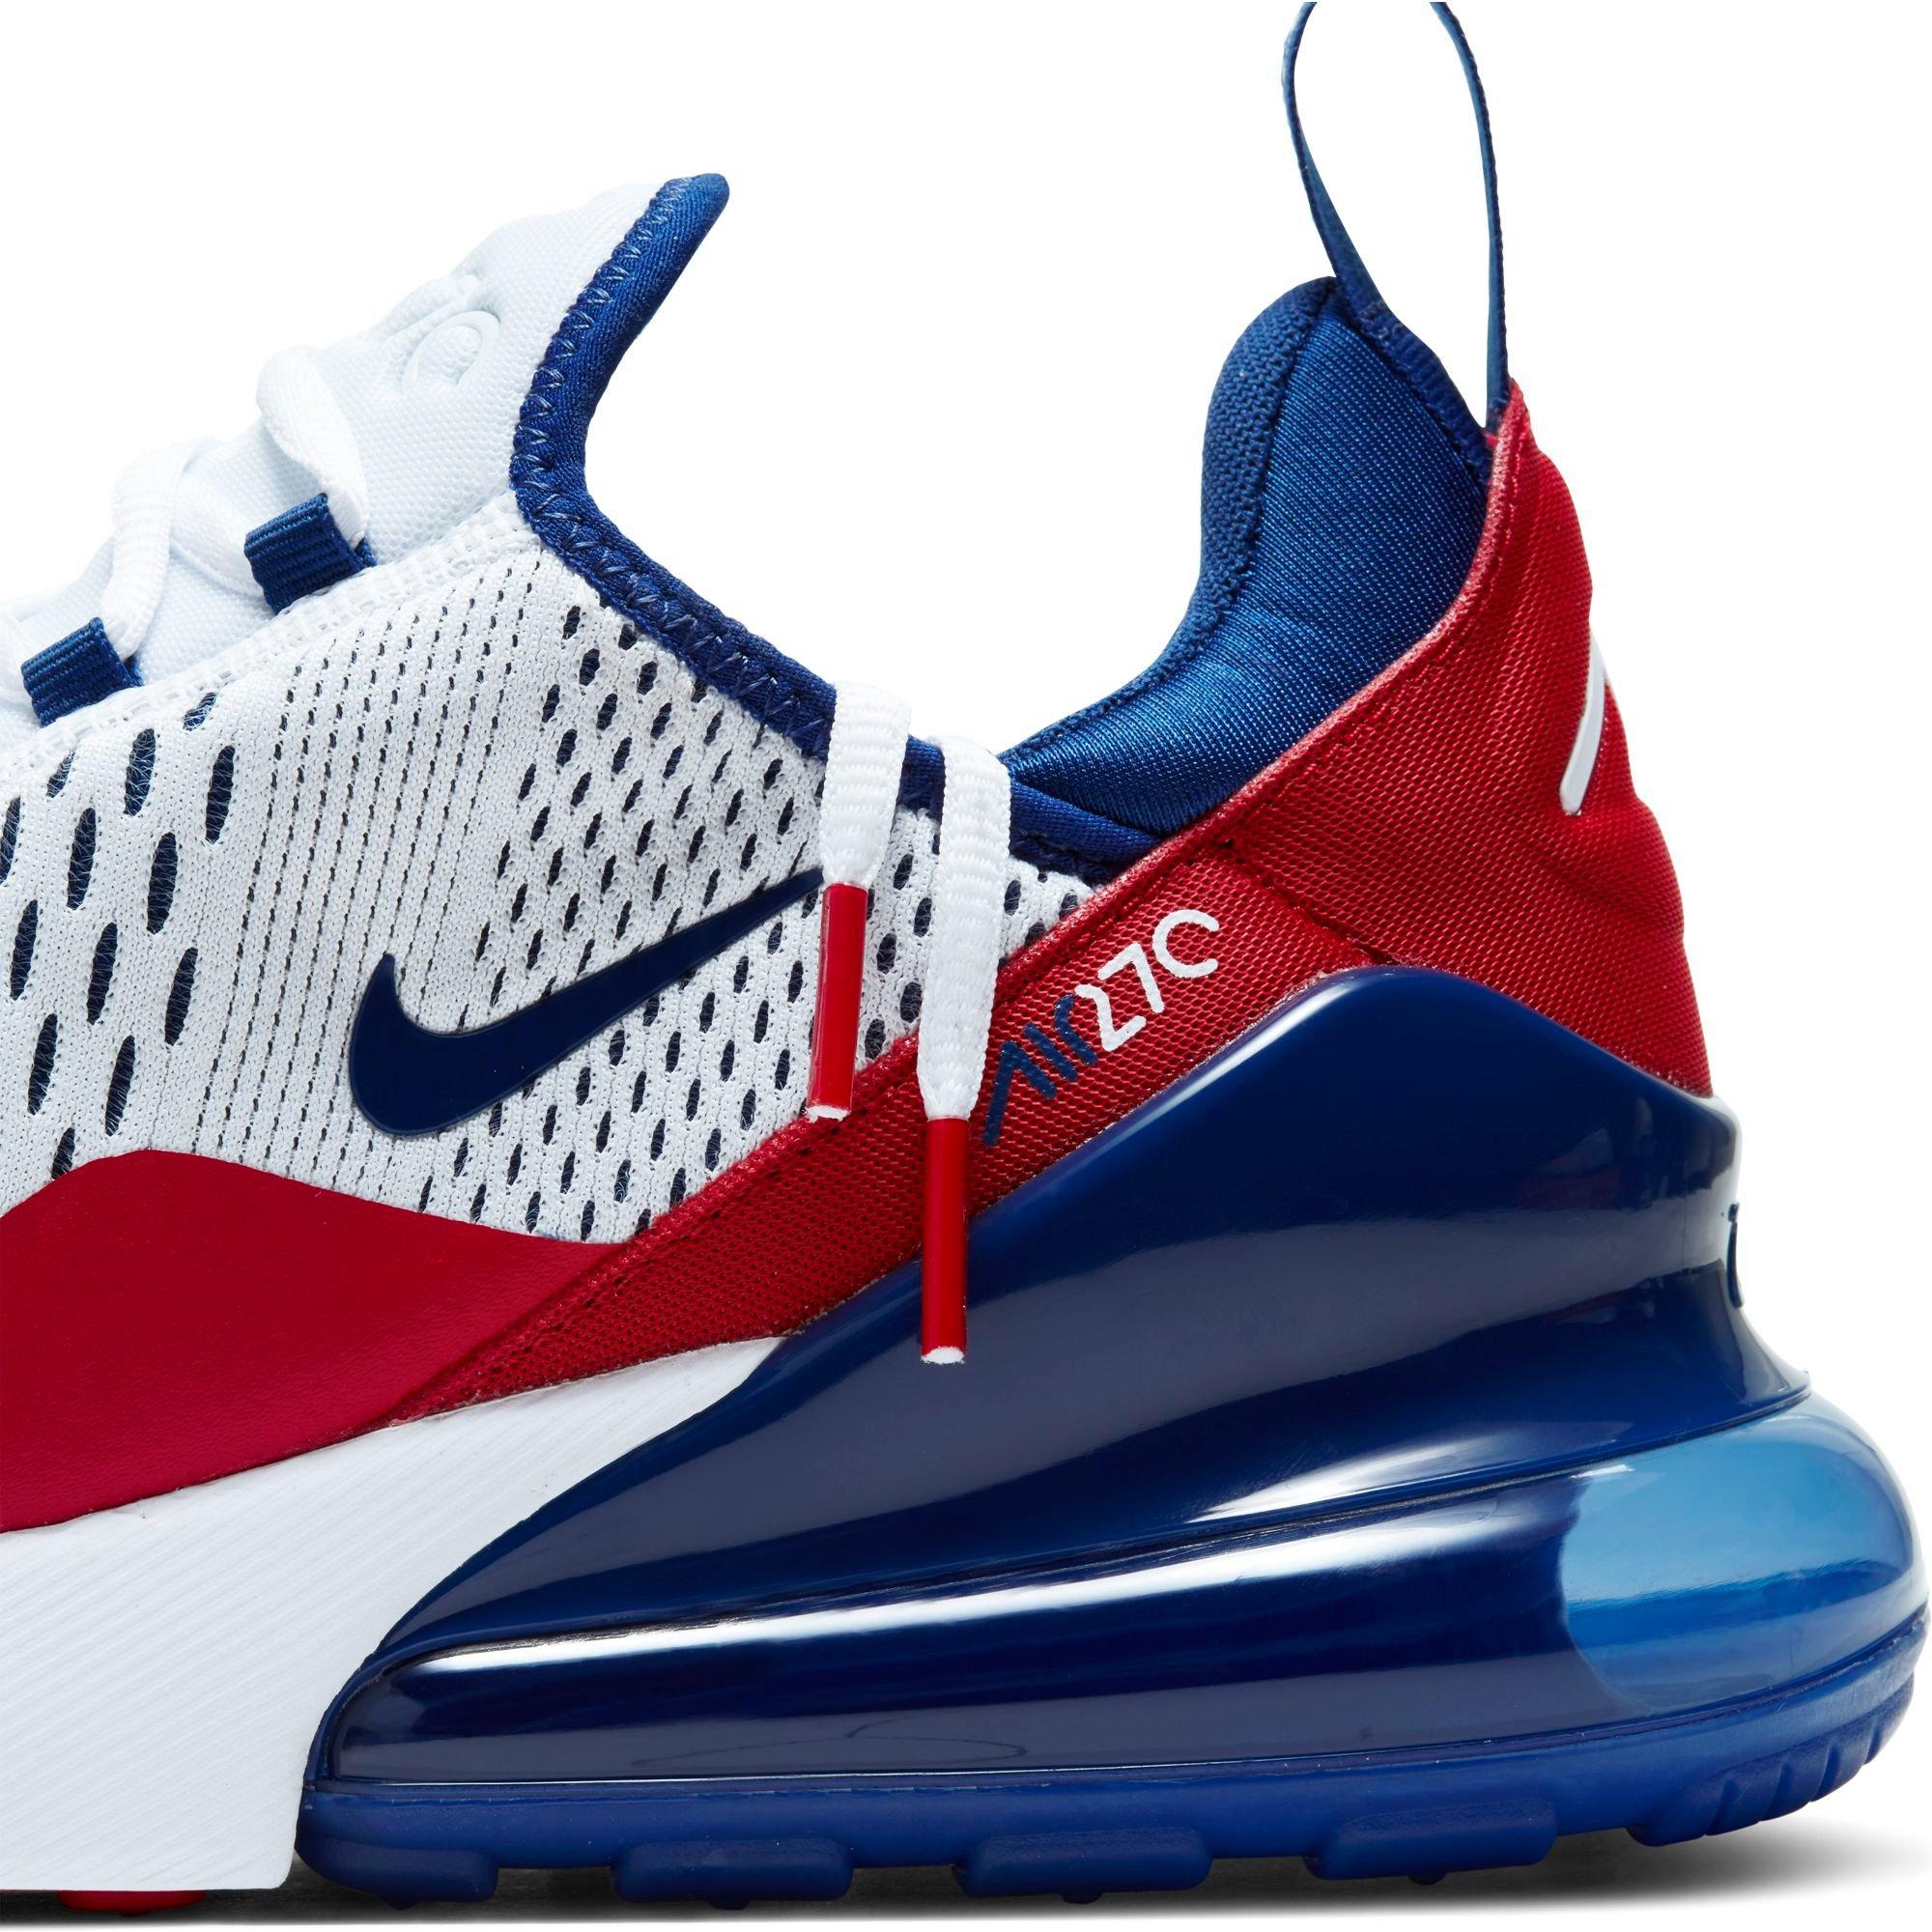 red white and royal blue air max 270